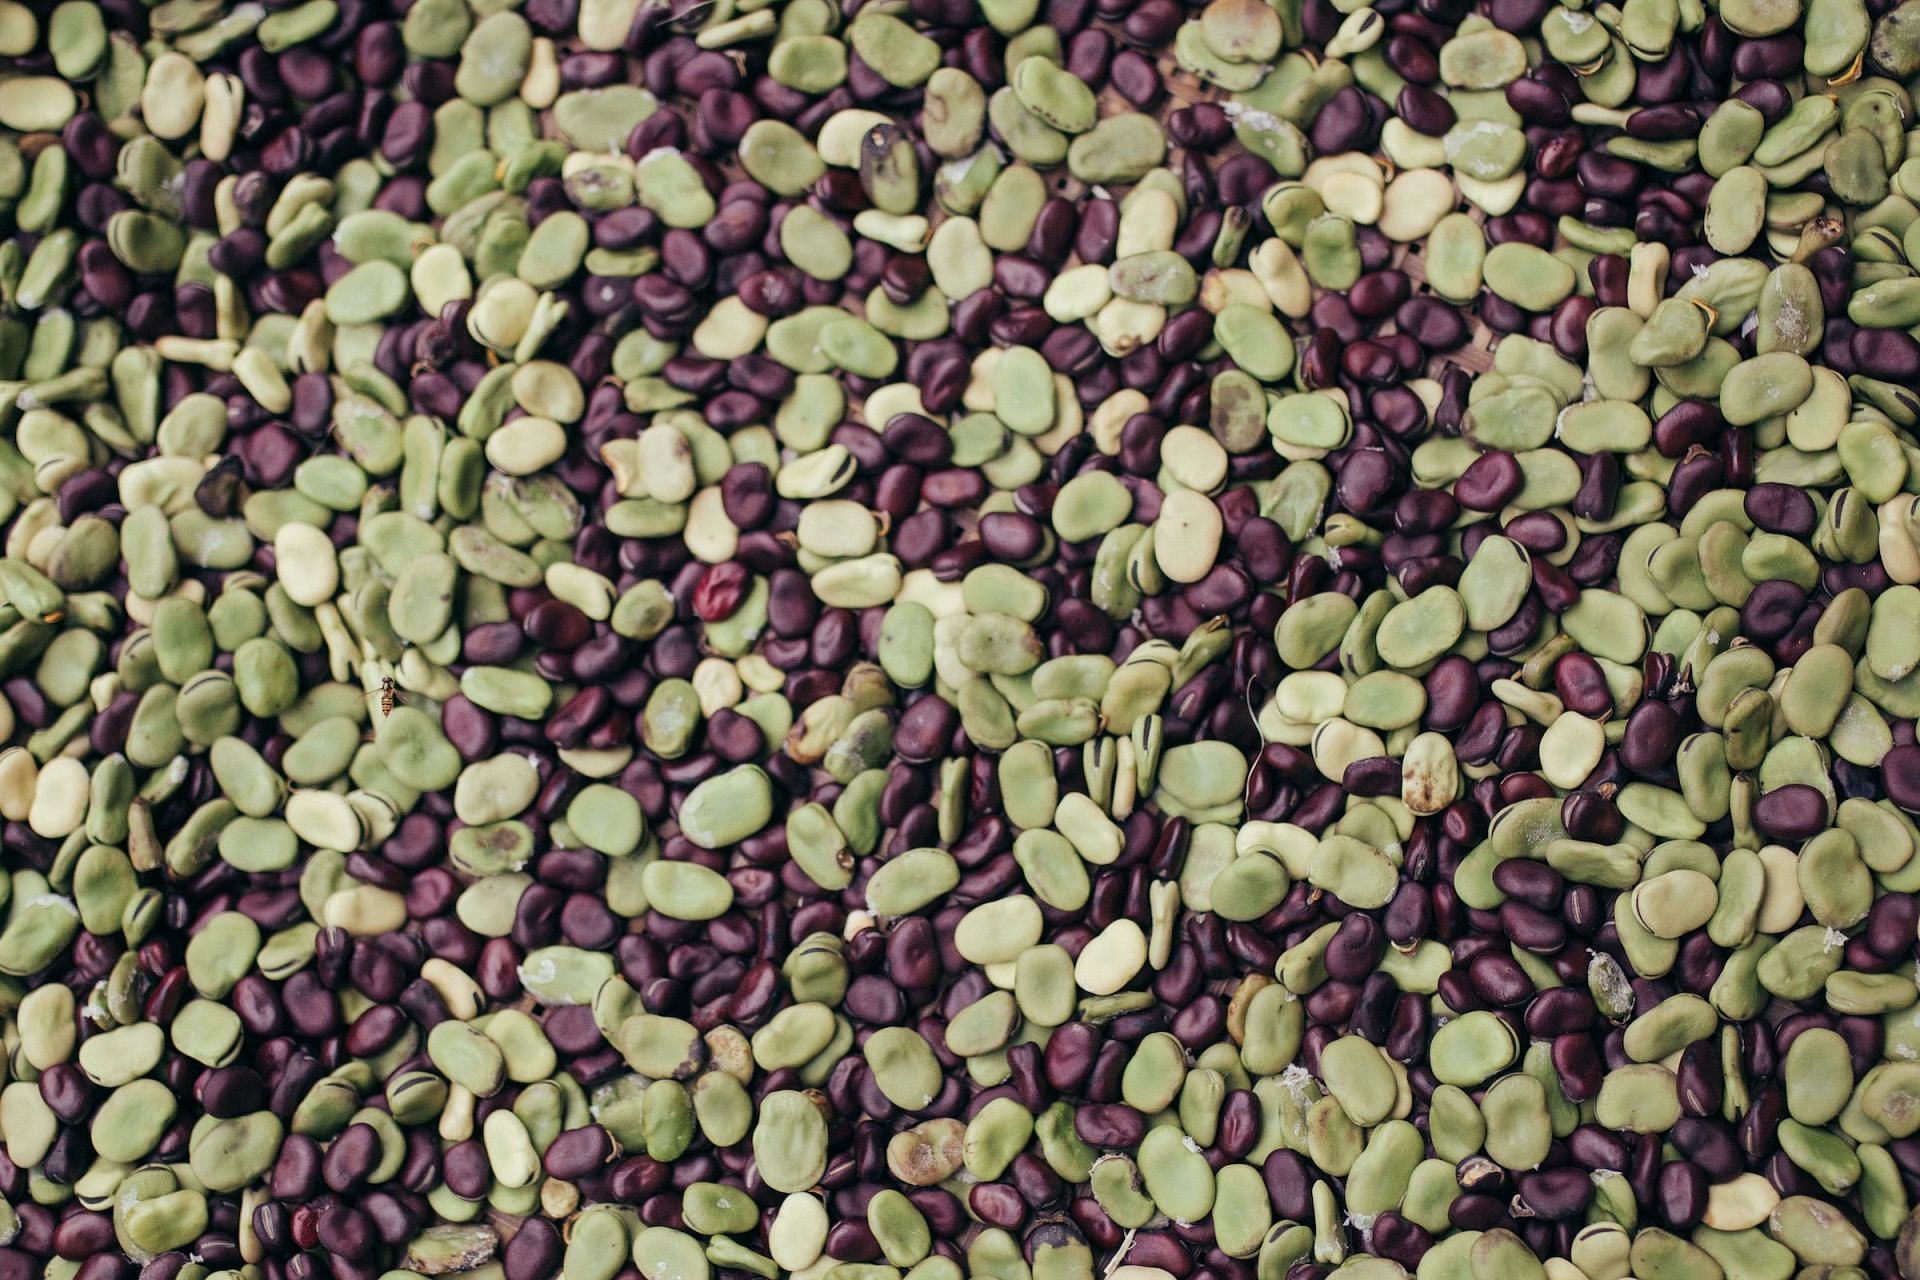 Lima beans are a good source of soluble fiber (Image via Unsplash/Joey Huang)